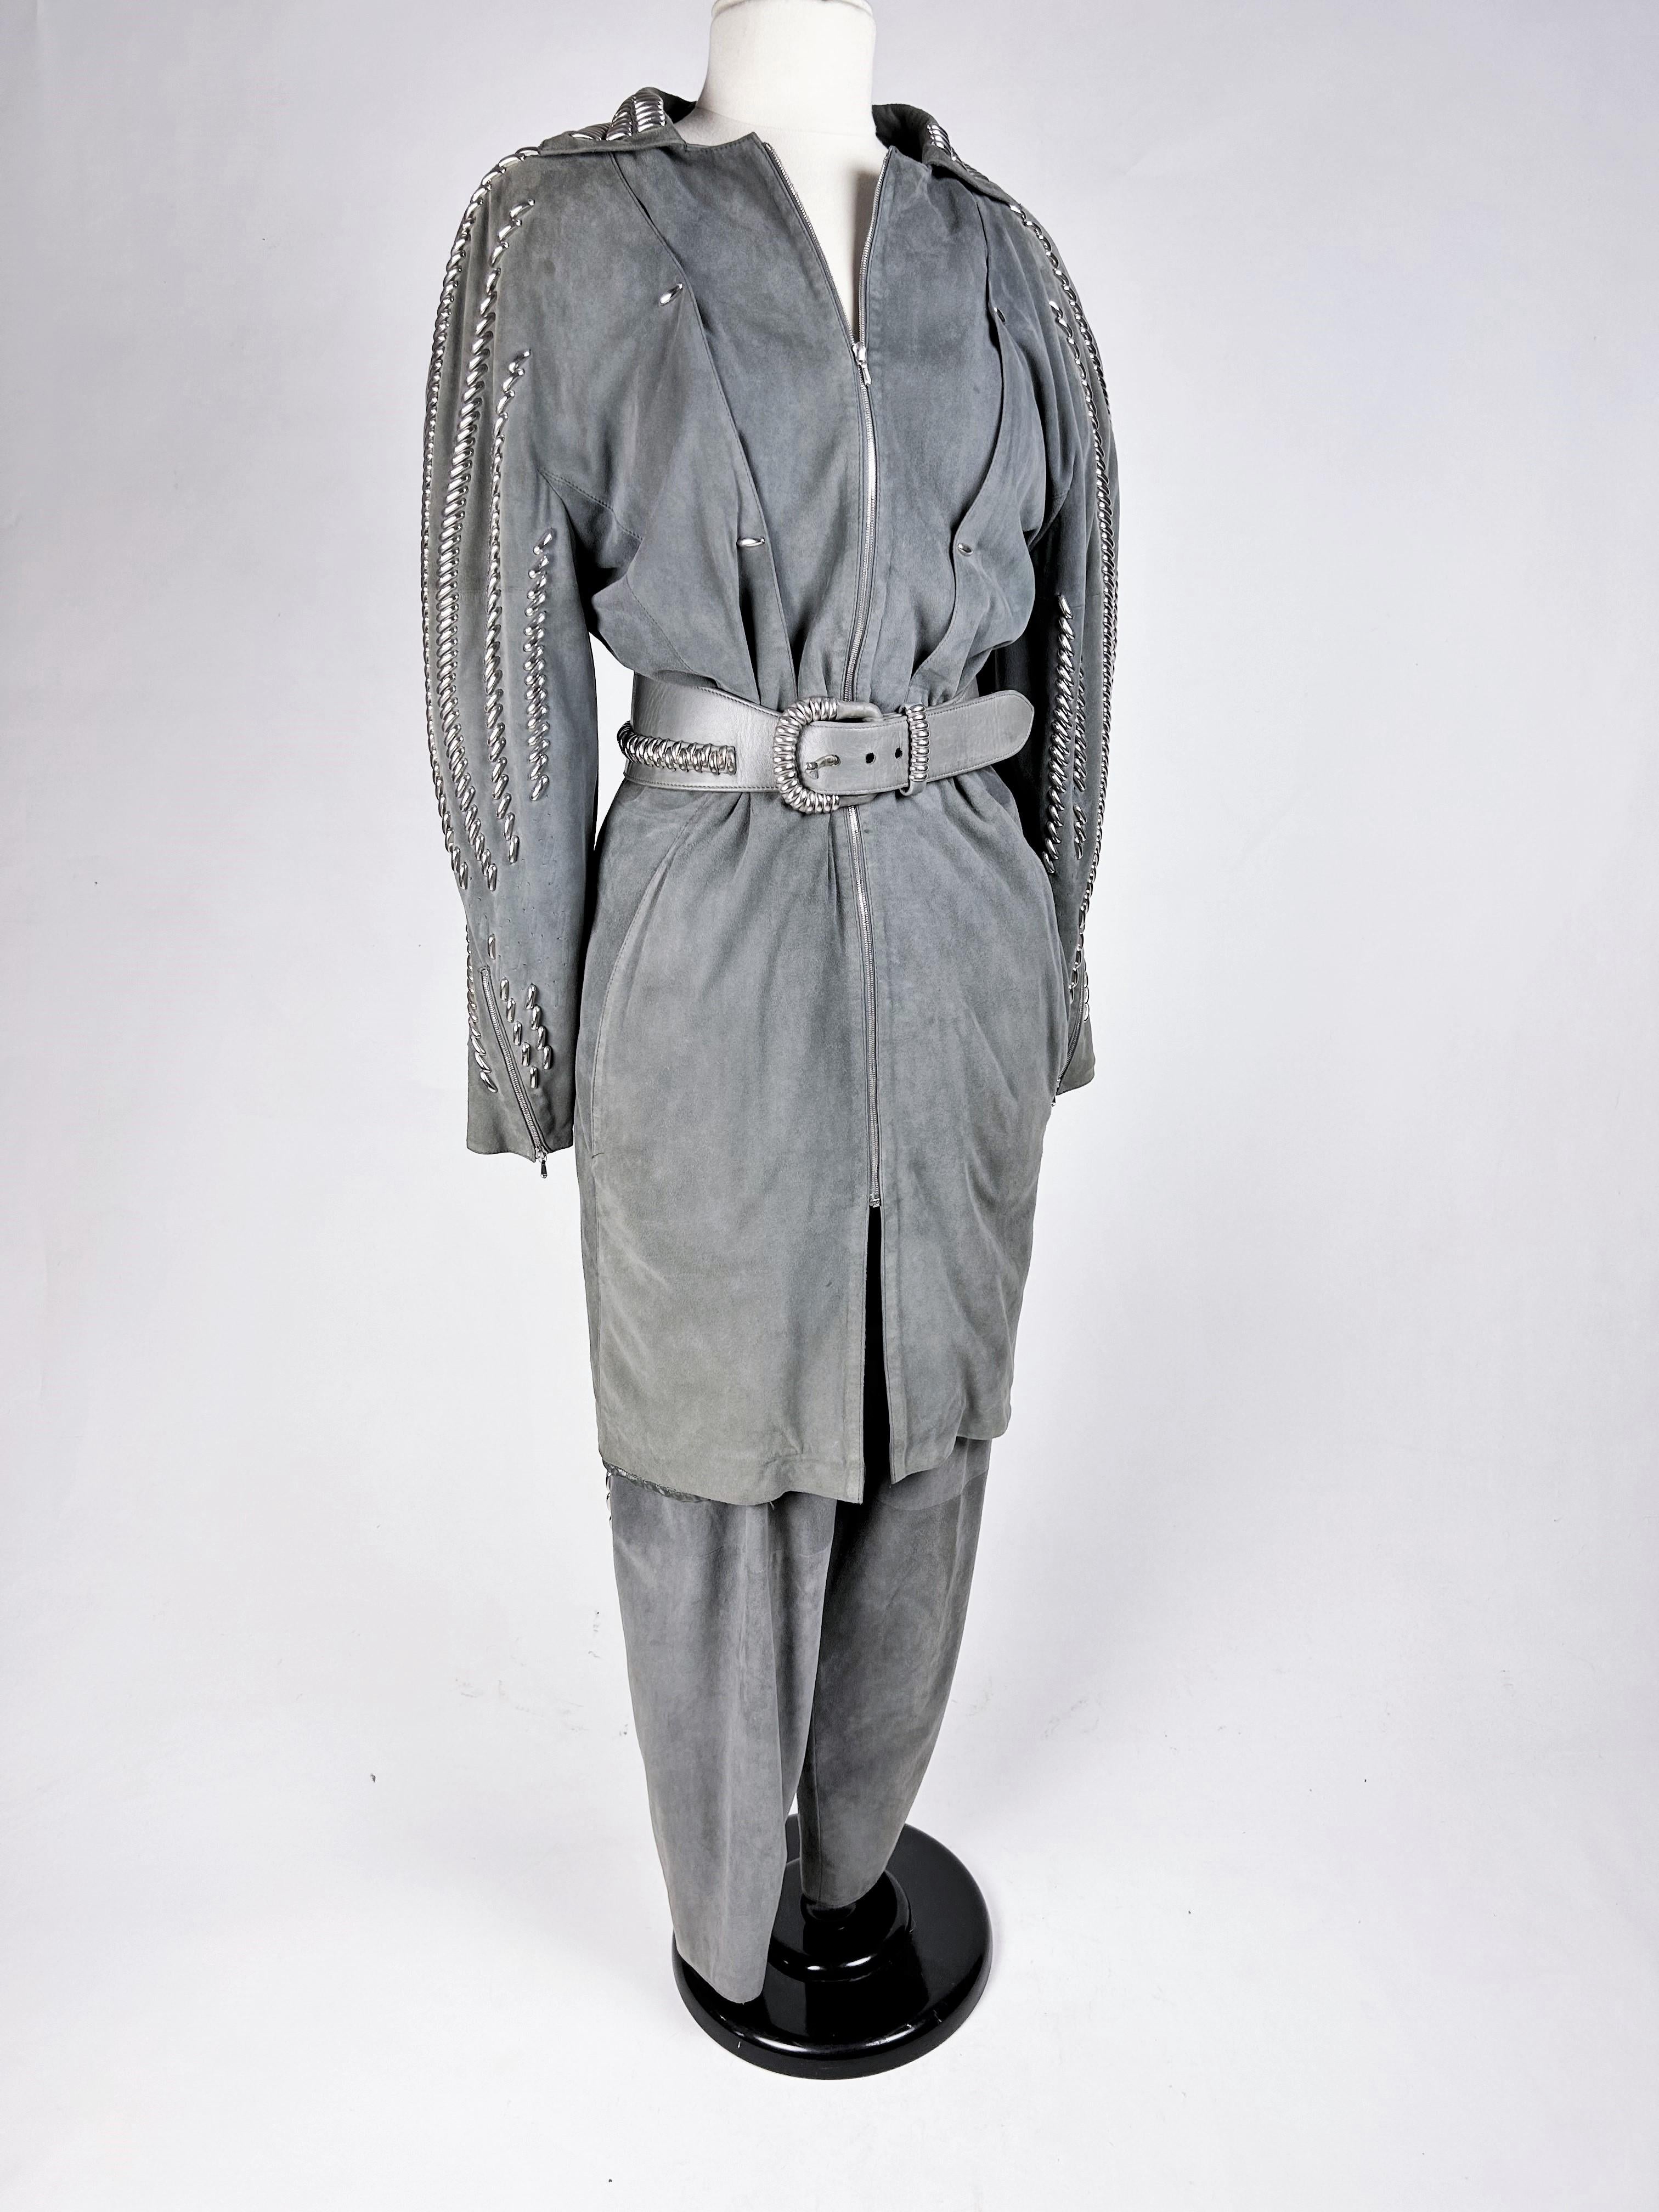 Circa 1985

France

Grey suede jacket and trouser suit by Claude Montana dating from the 1980s. Long zip-front jacket with architectural long sleeves, emphasised by waves studded with silver metal and echoed on the trousers and matching belt.